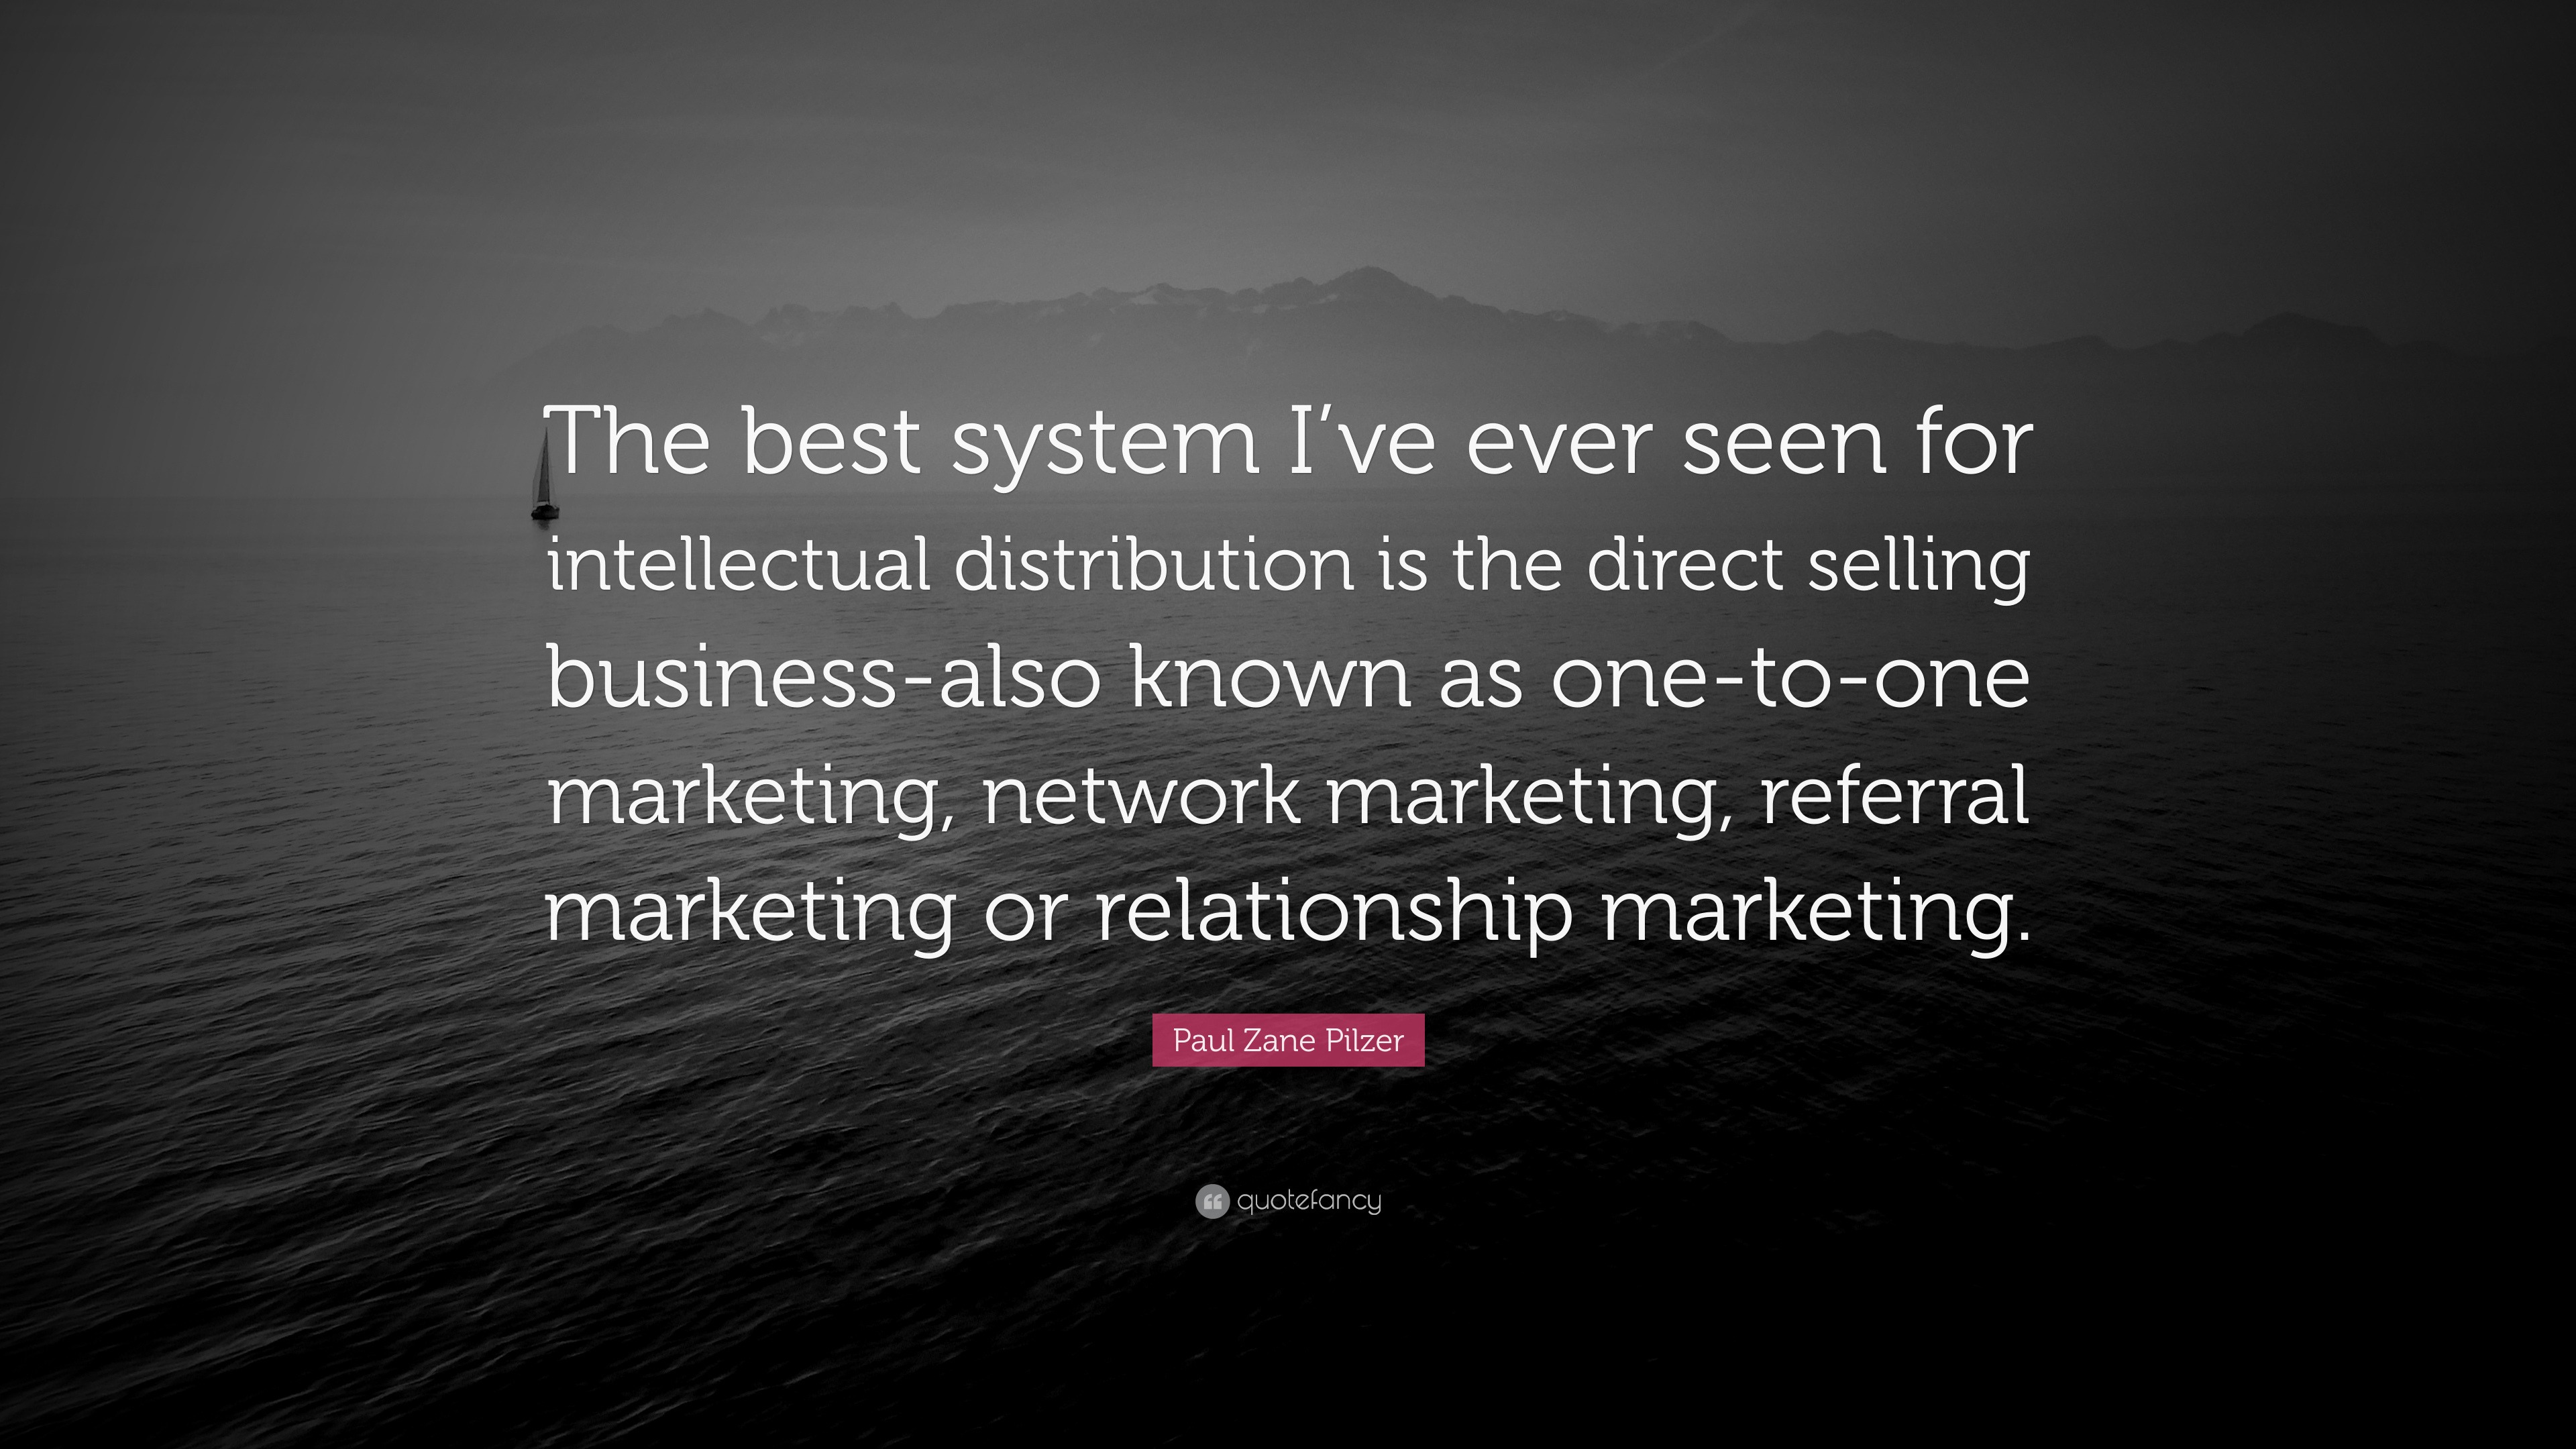 Paul Zane Pilzer Quote: “The best system I’ve ever seen for ...